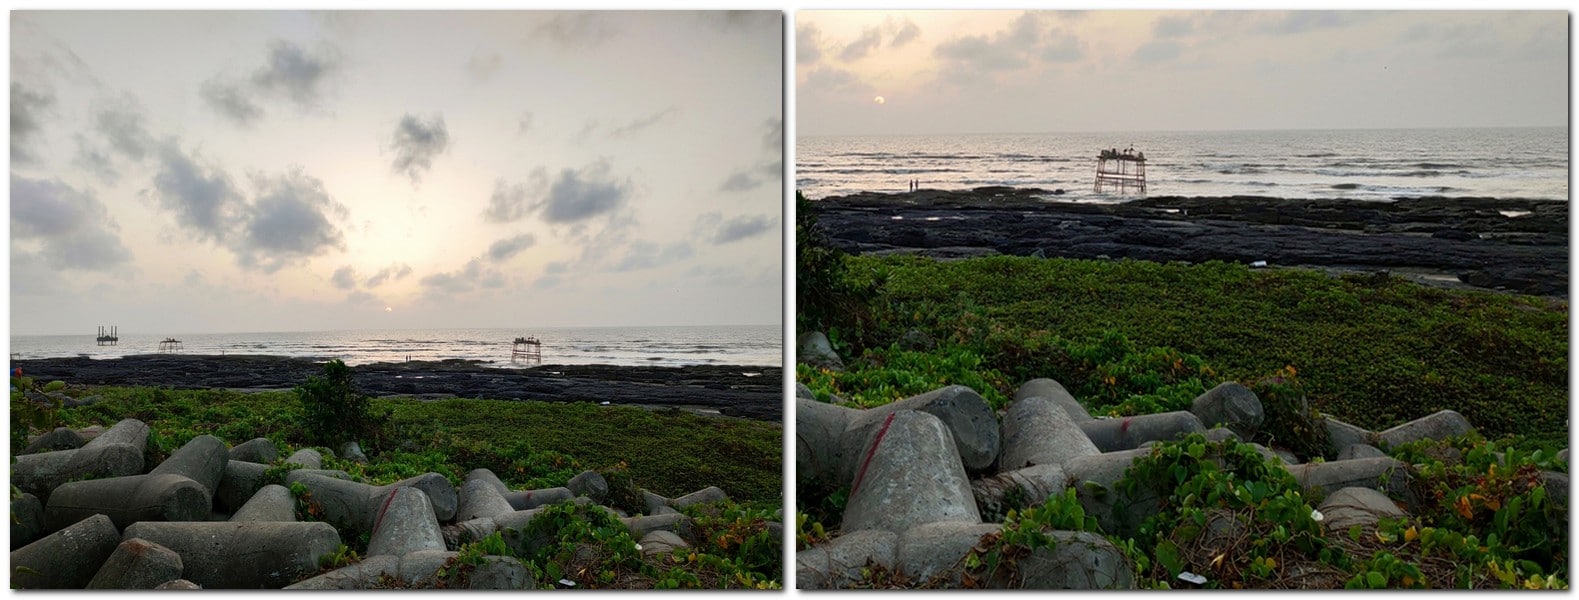 48 MP (L) photo vs Zoomed in (R). The details are preserved even when zooming in. 